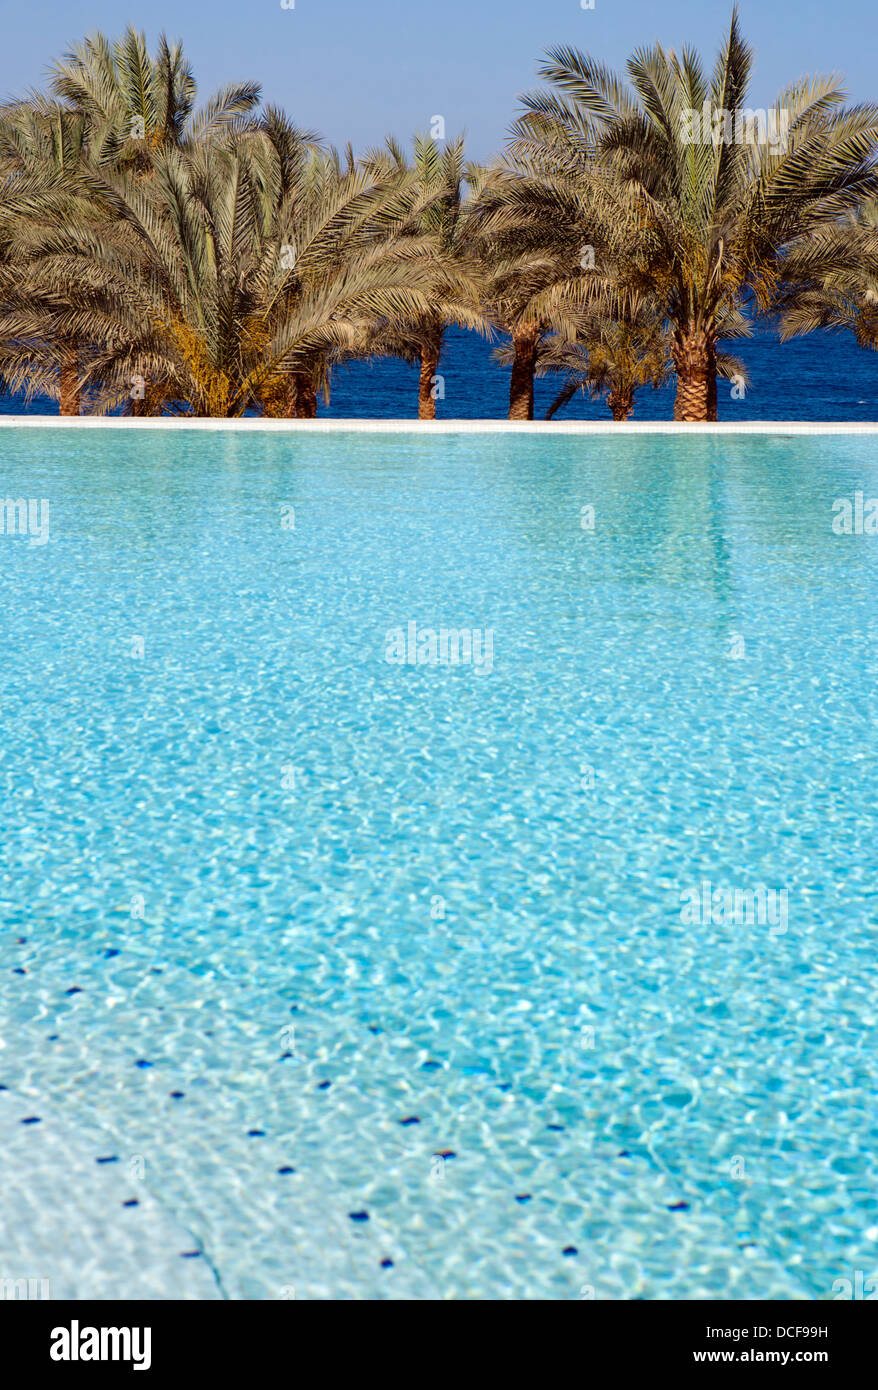 Shallow focus image of an infinity pool,palm trees & red sea in Egypt Stock Photo